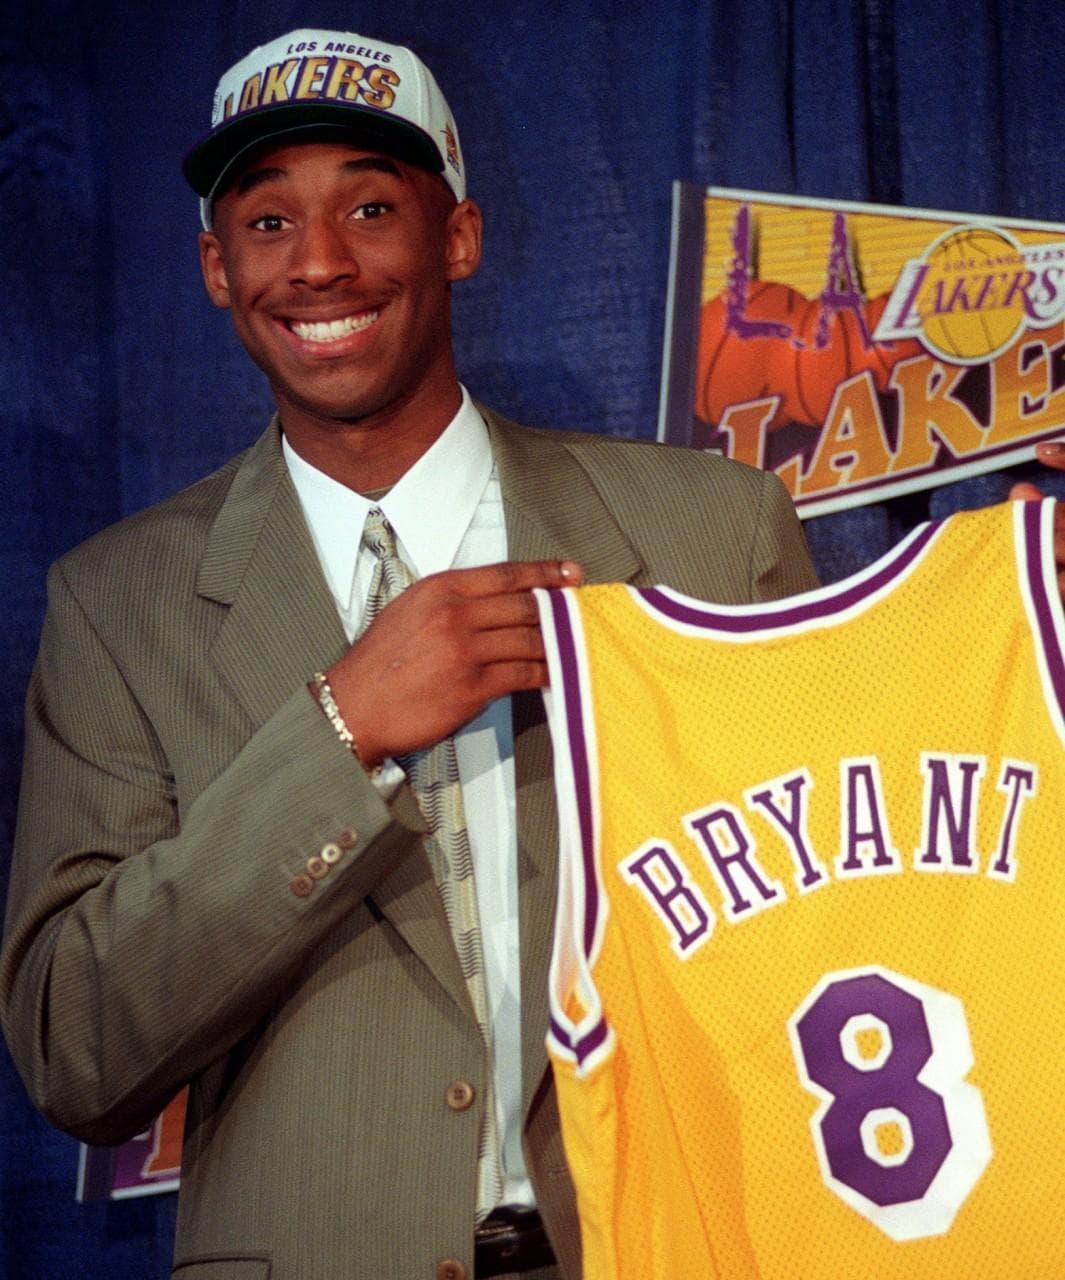 Kobe Bryant's Jerseys, Shoes, and Other Memorabilia to Be Auctioned